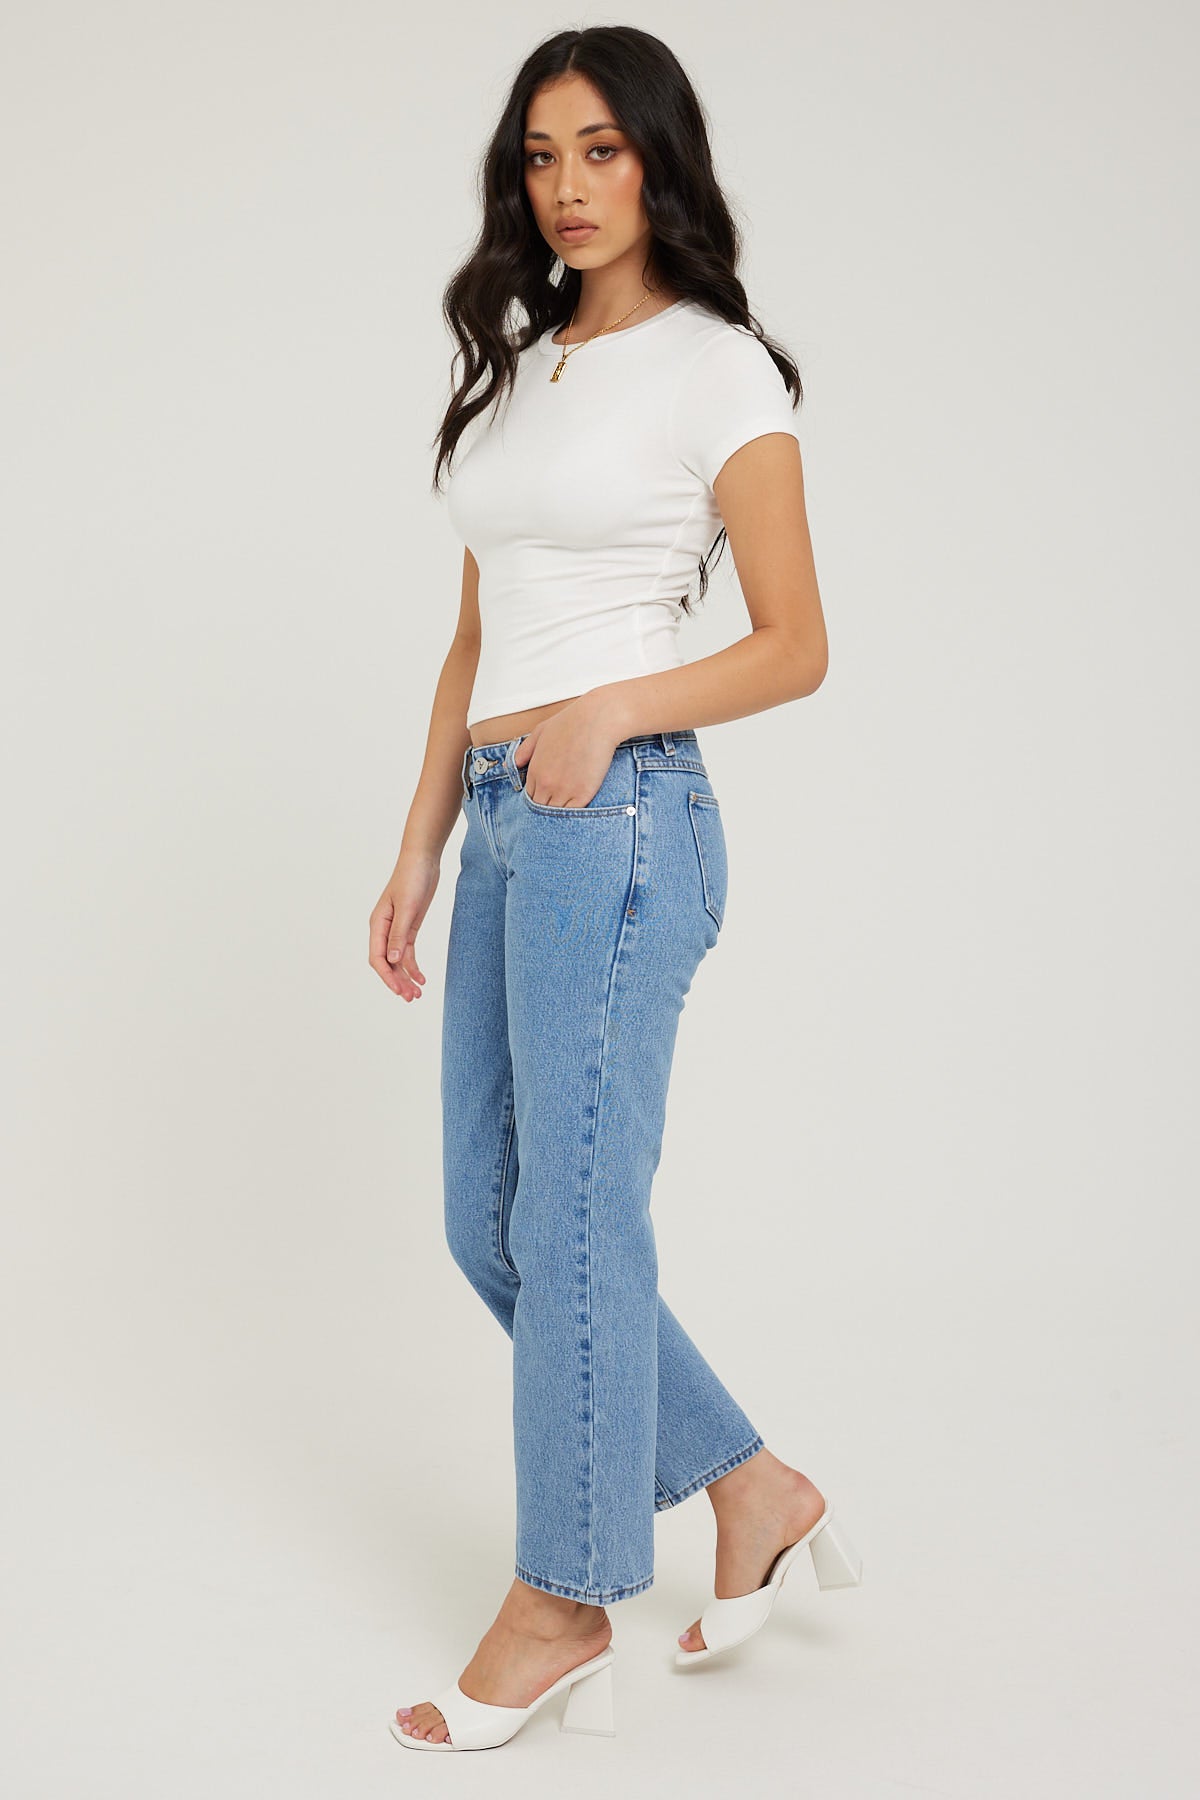 Abrand A 99 Low Rise Straight Petite Jean Katie Organic